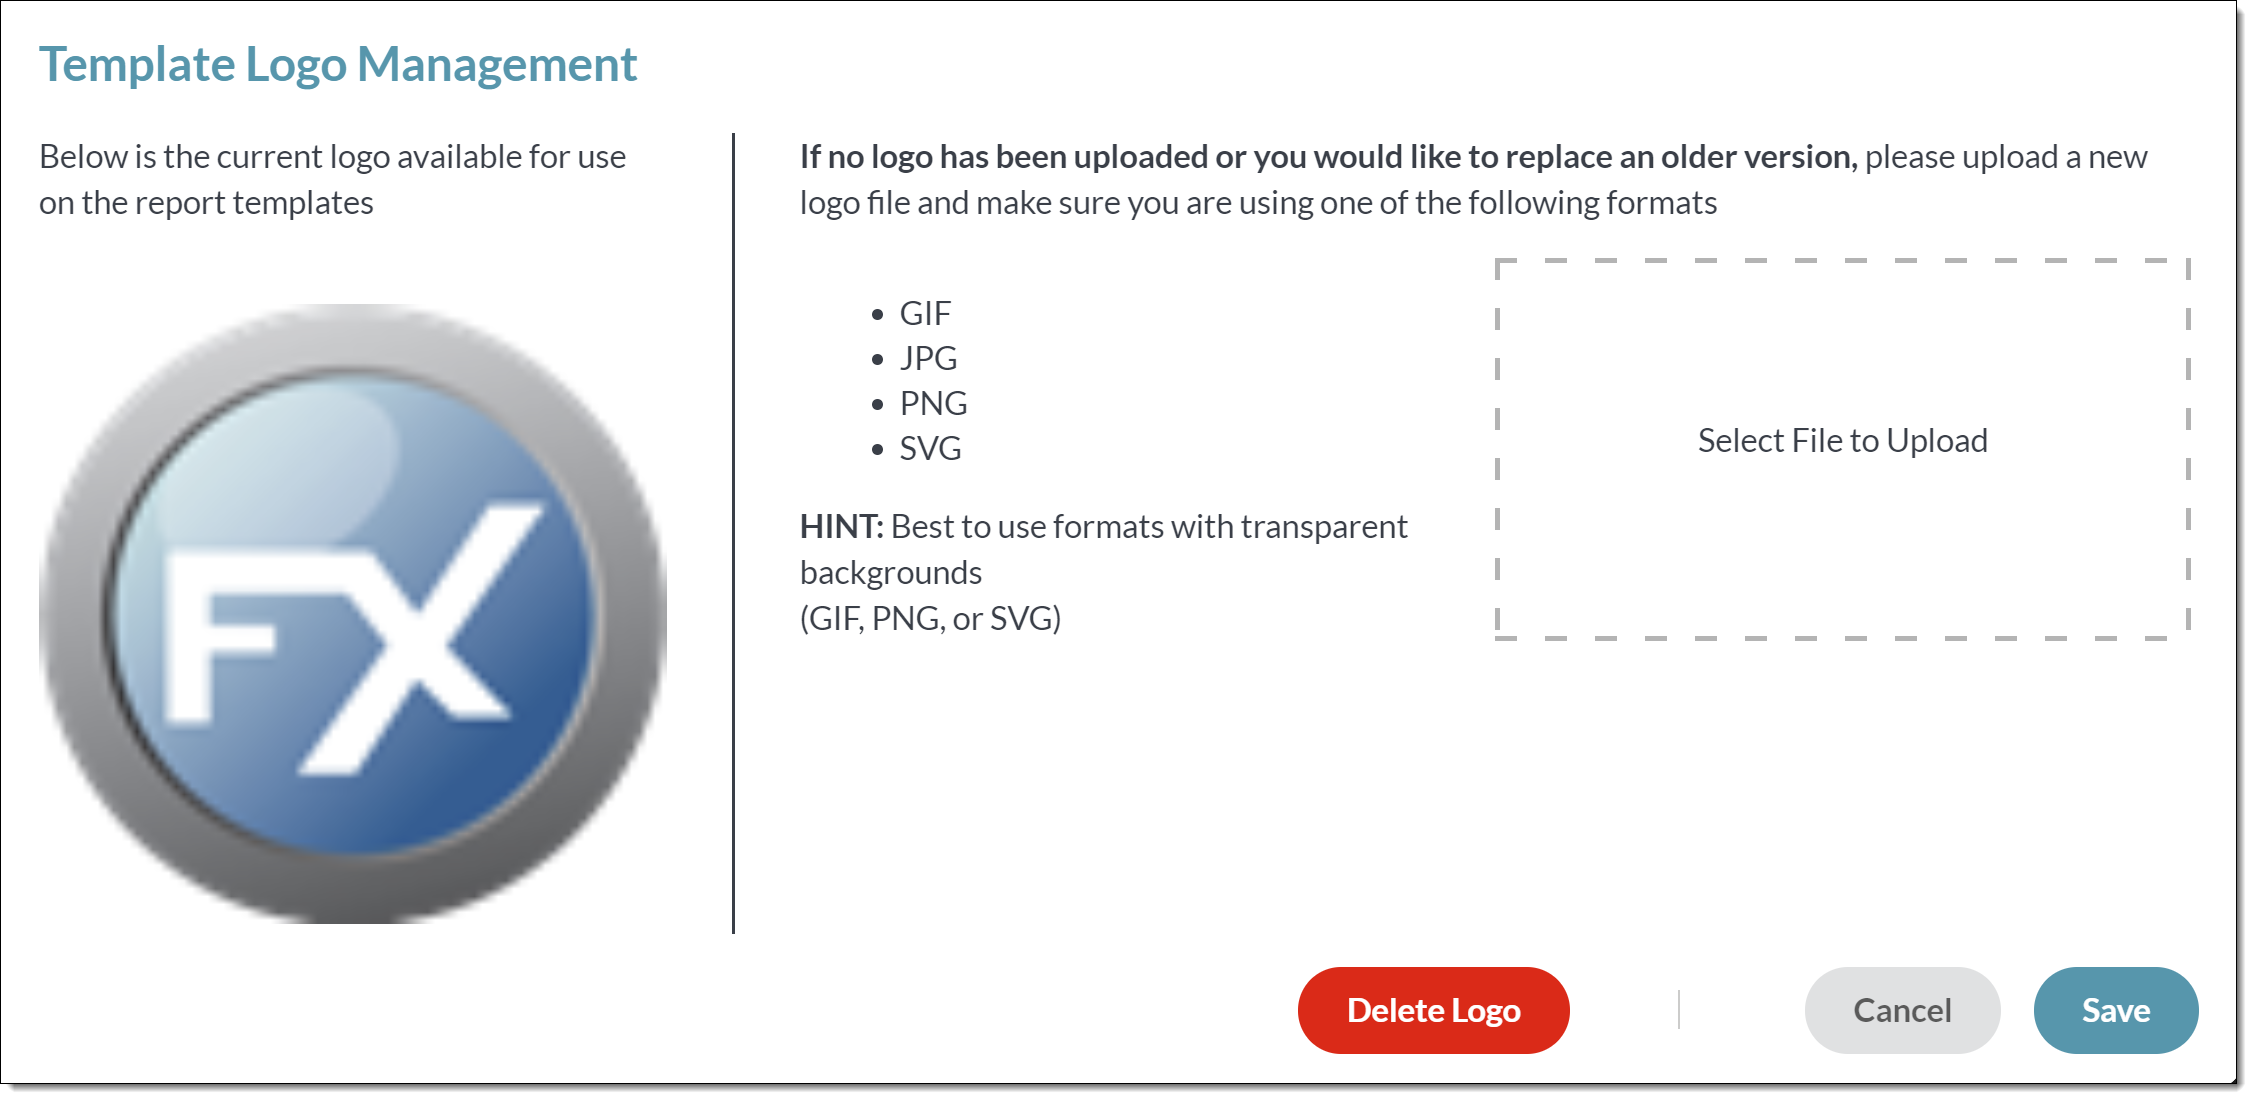 Screenshot of the Template Logo Management screen with a logo file